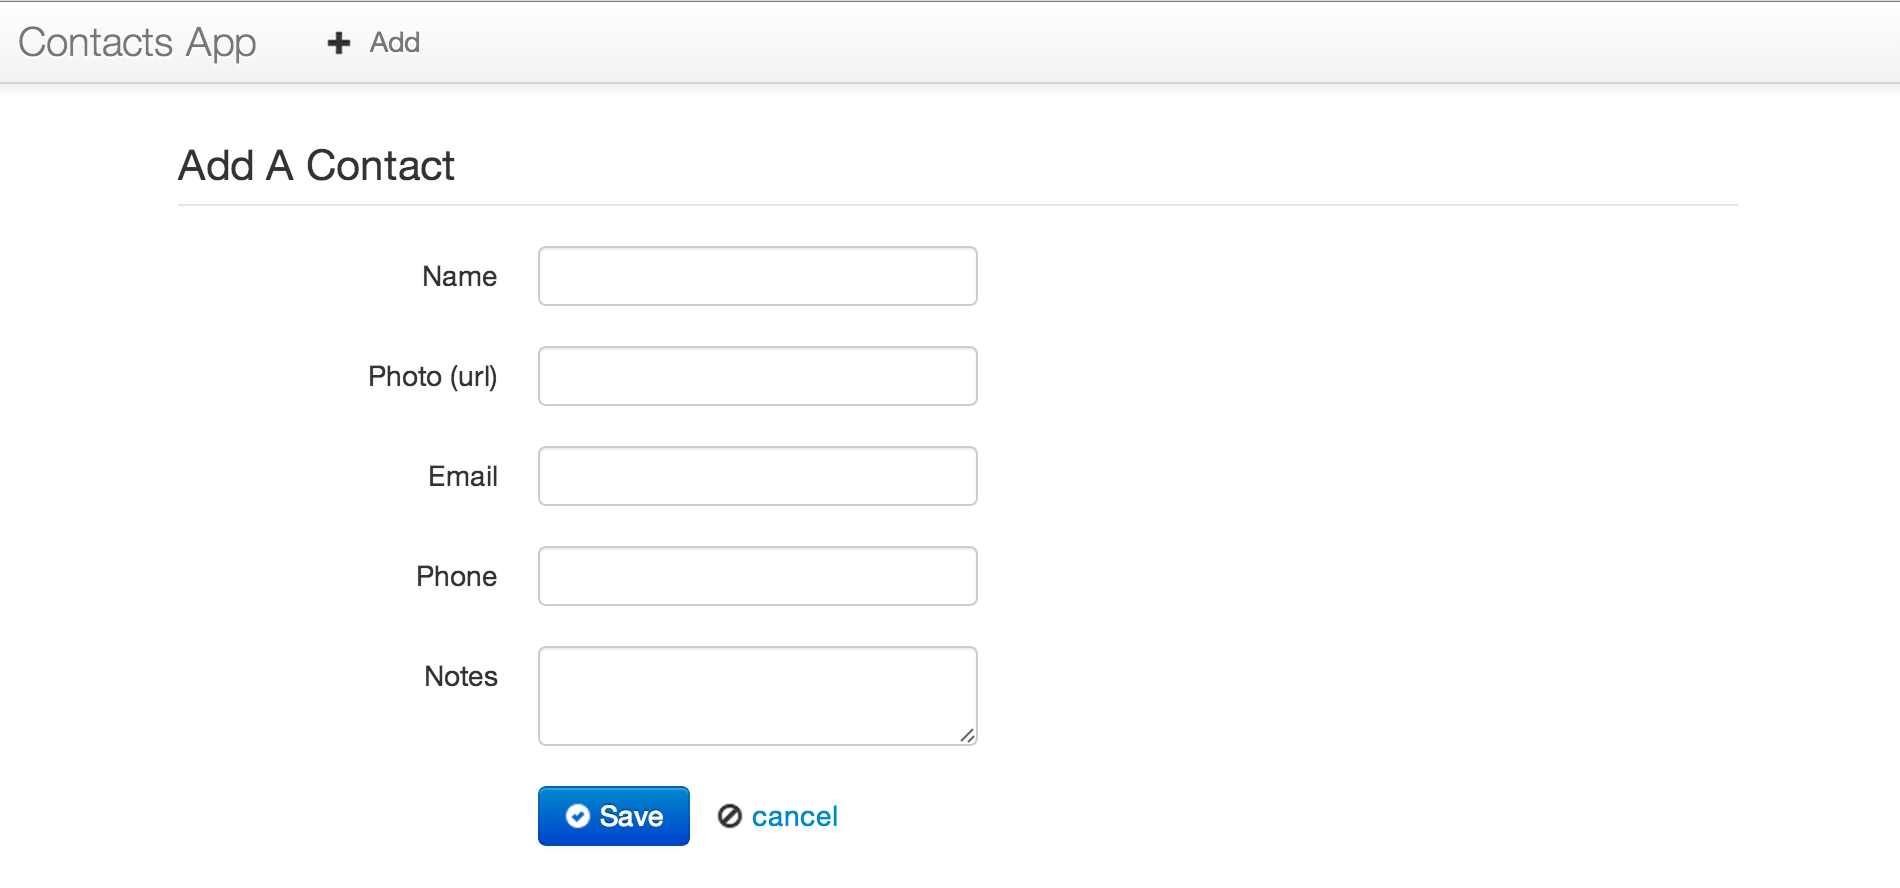 Figure 1: This is the add contact form.